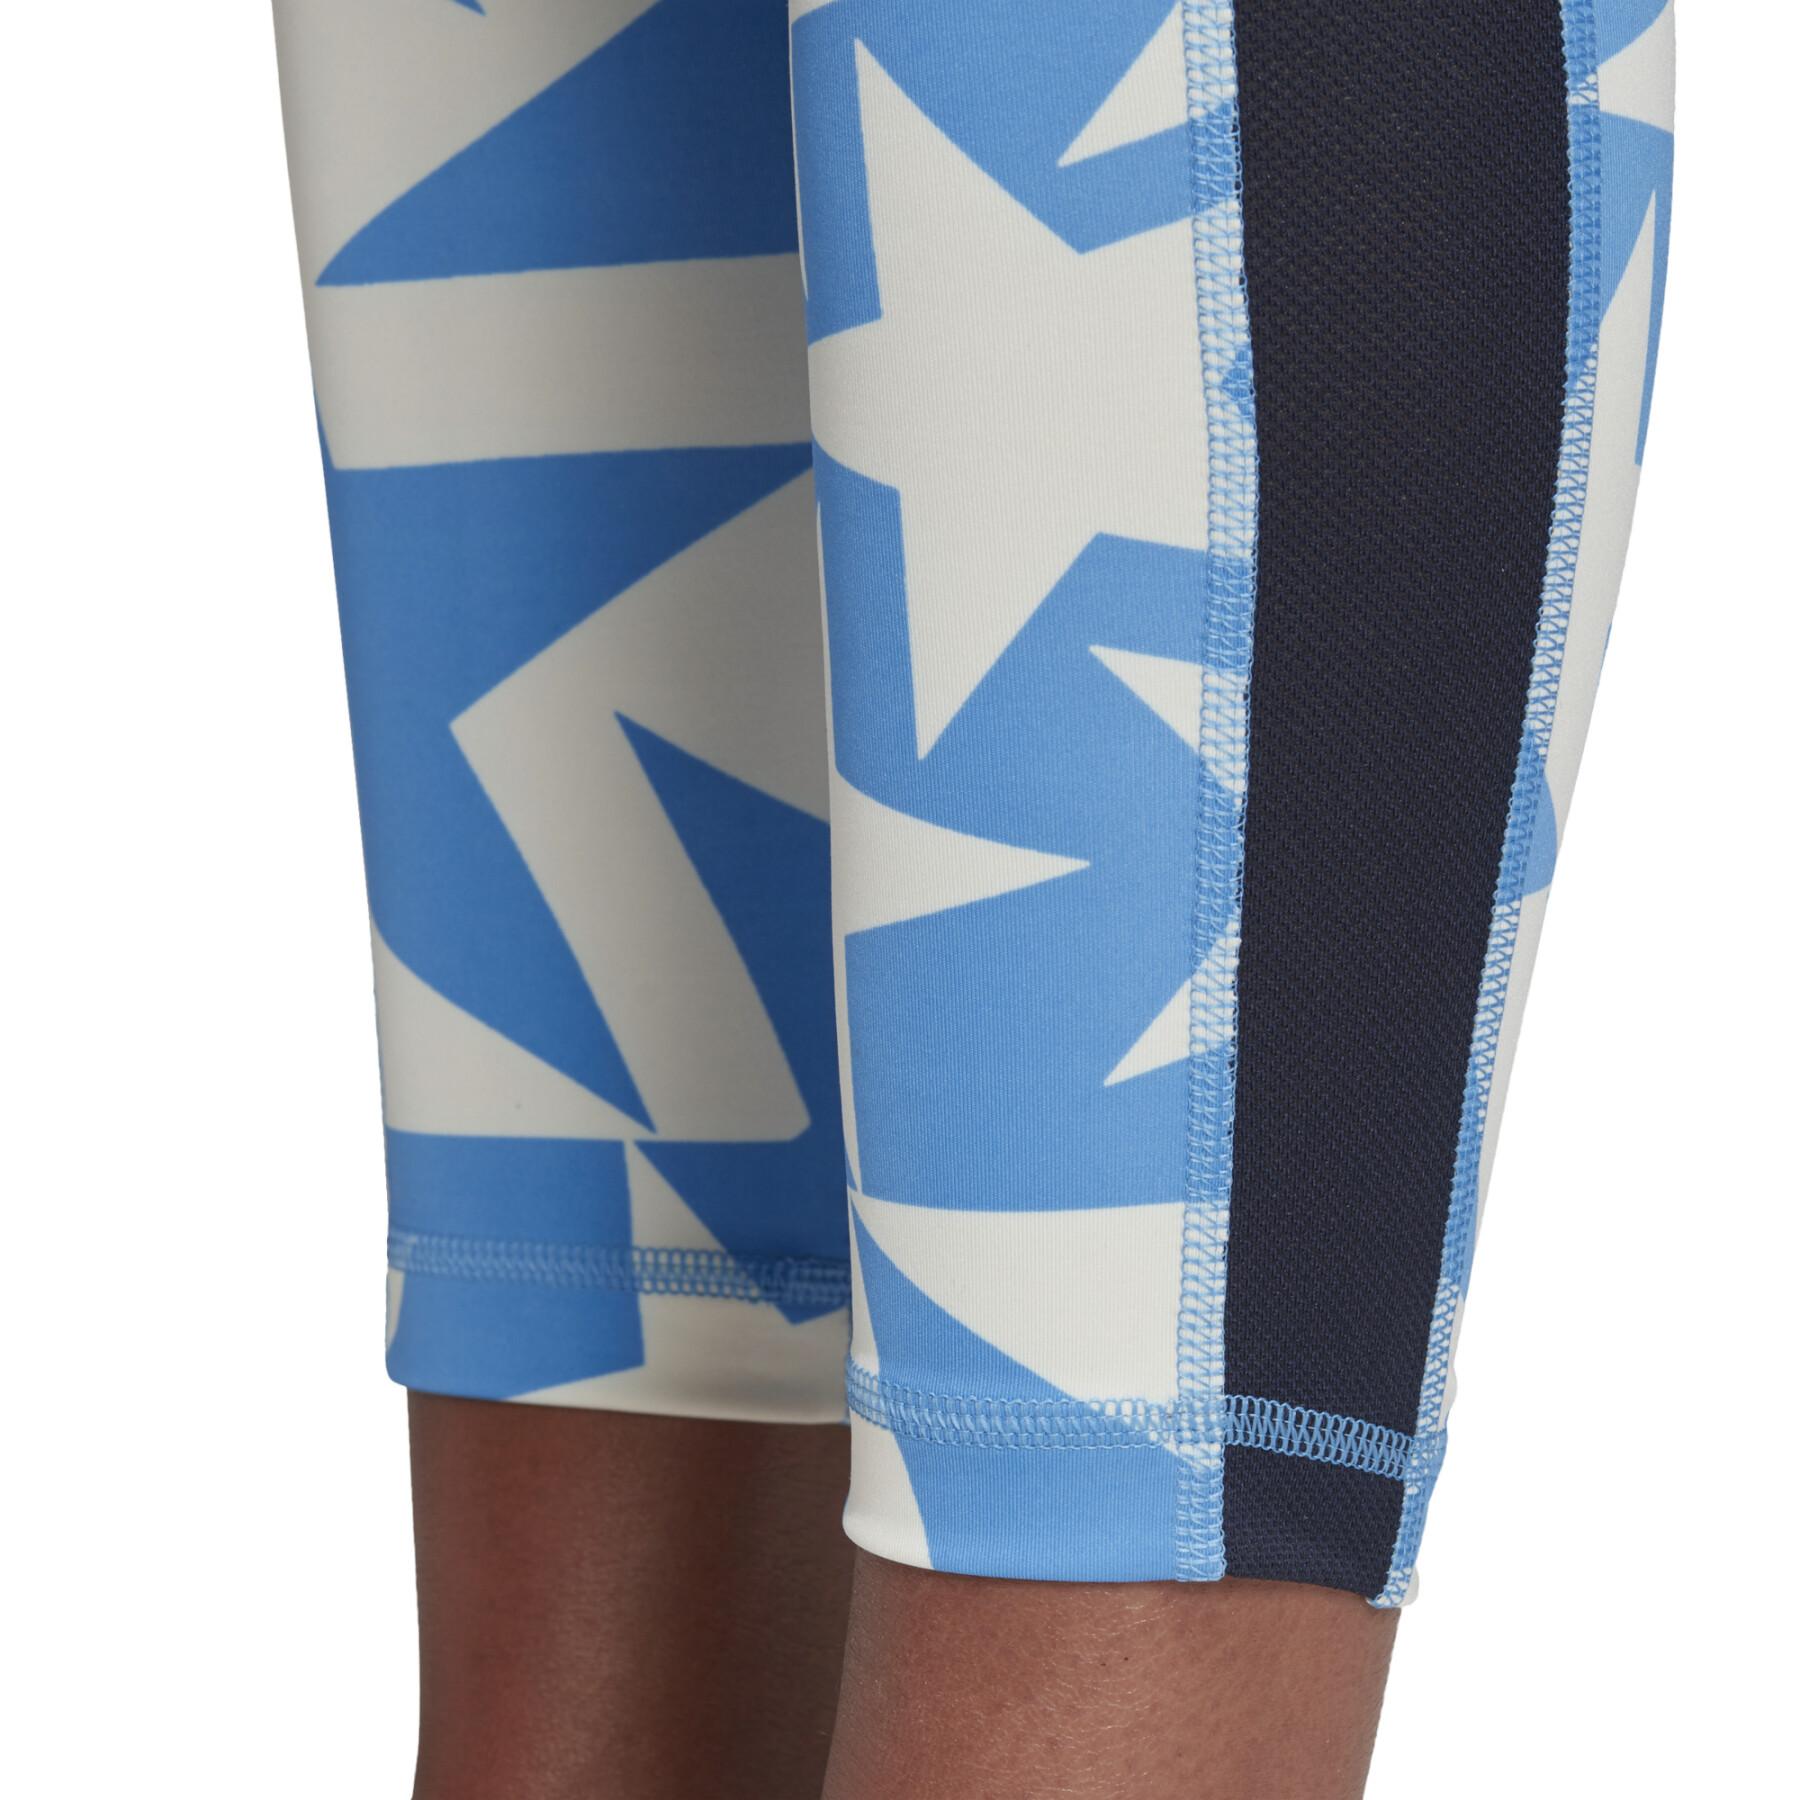 Women's Legging adidas Believe This Iteration High-Rise Long